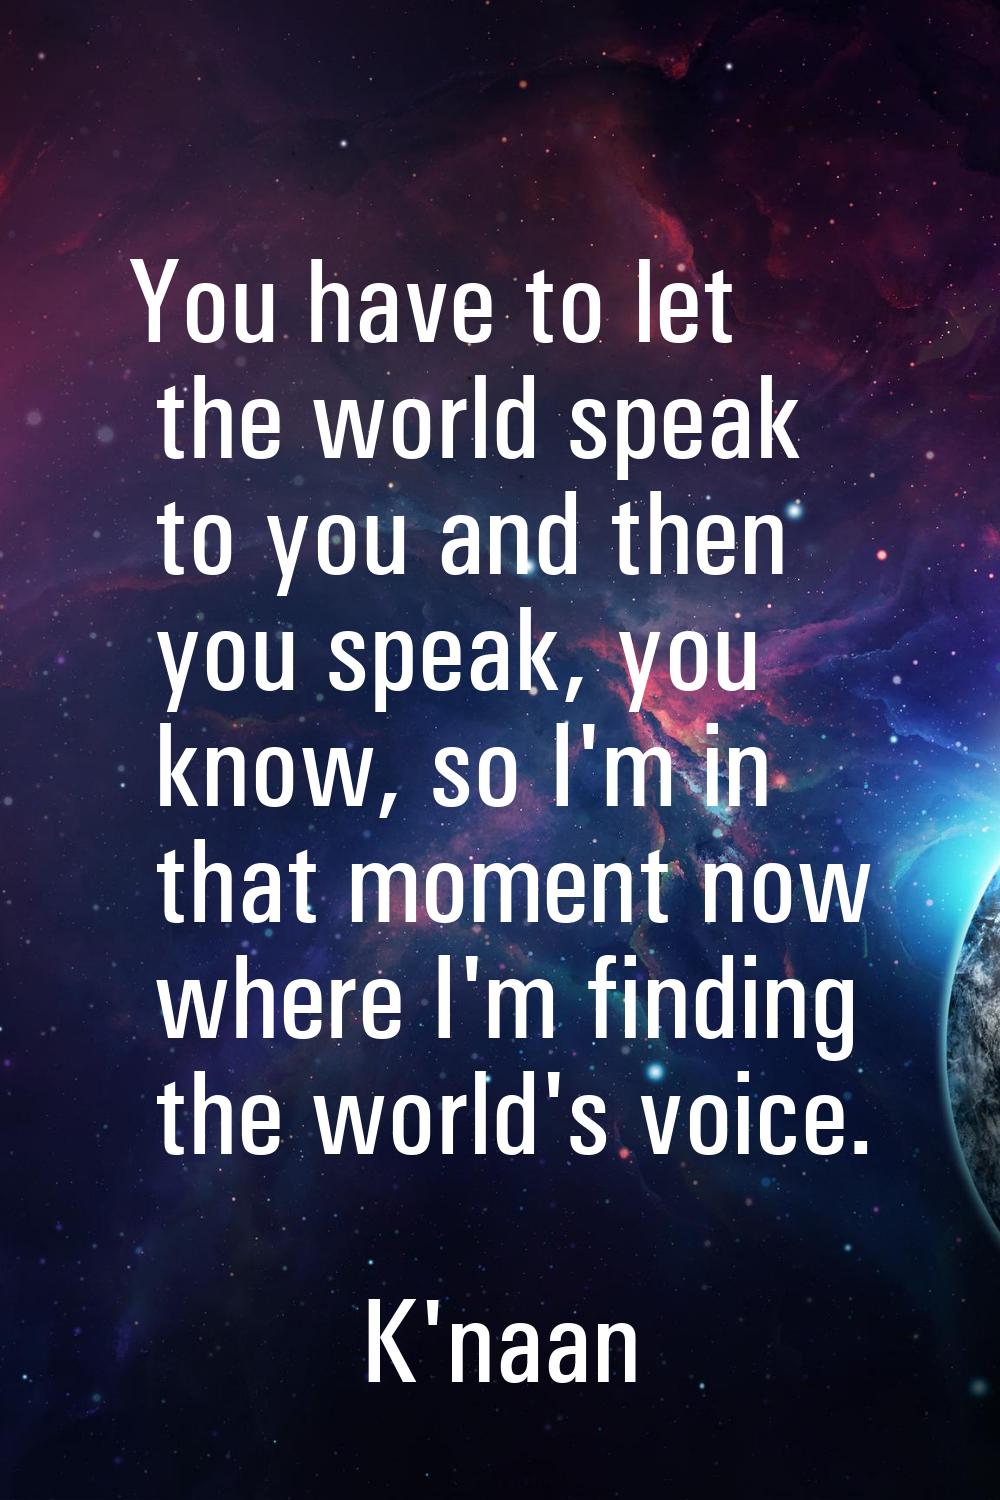 You have to let the world speak to you and then you speak, you know, so I'm in that moment now wher